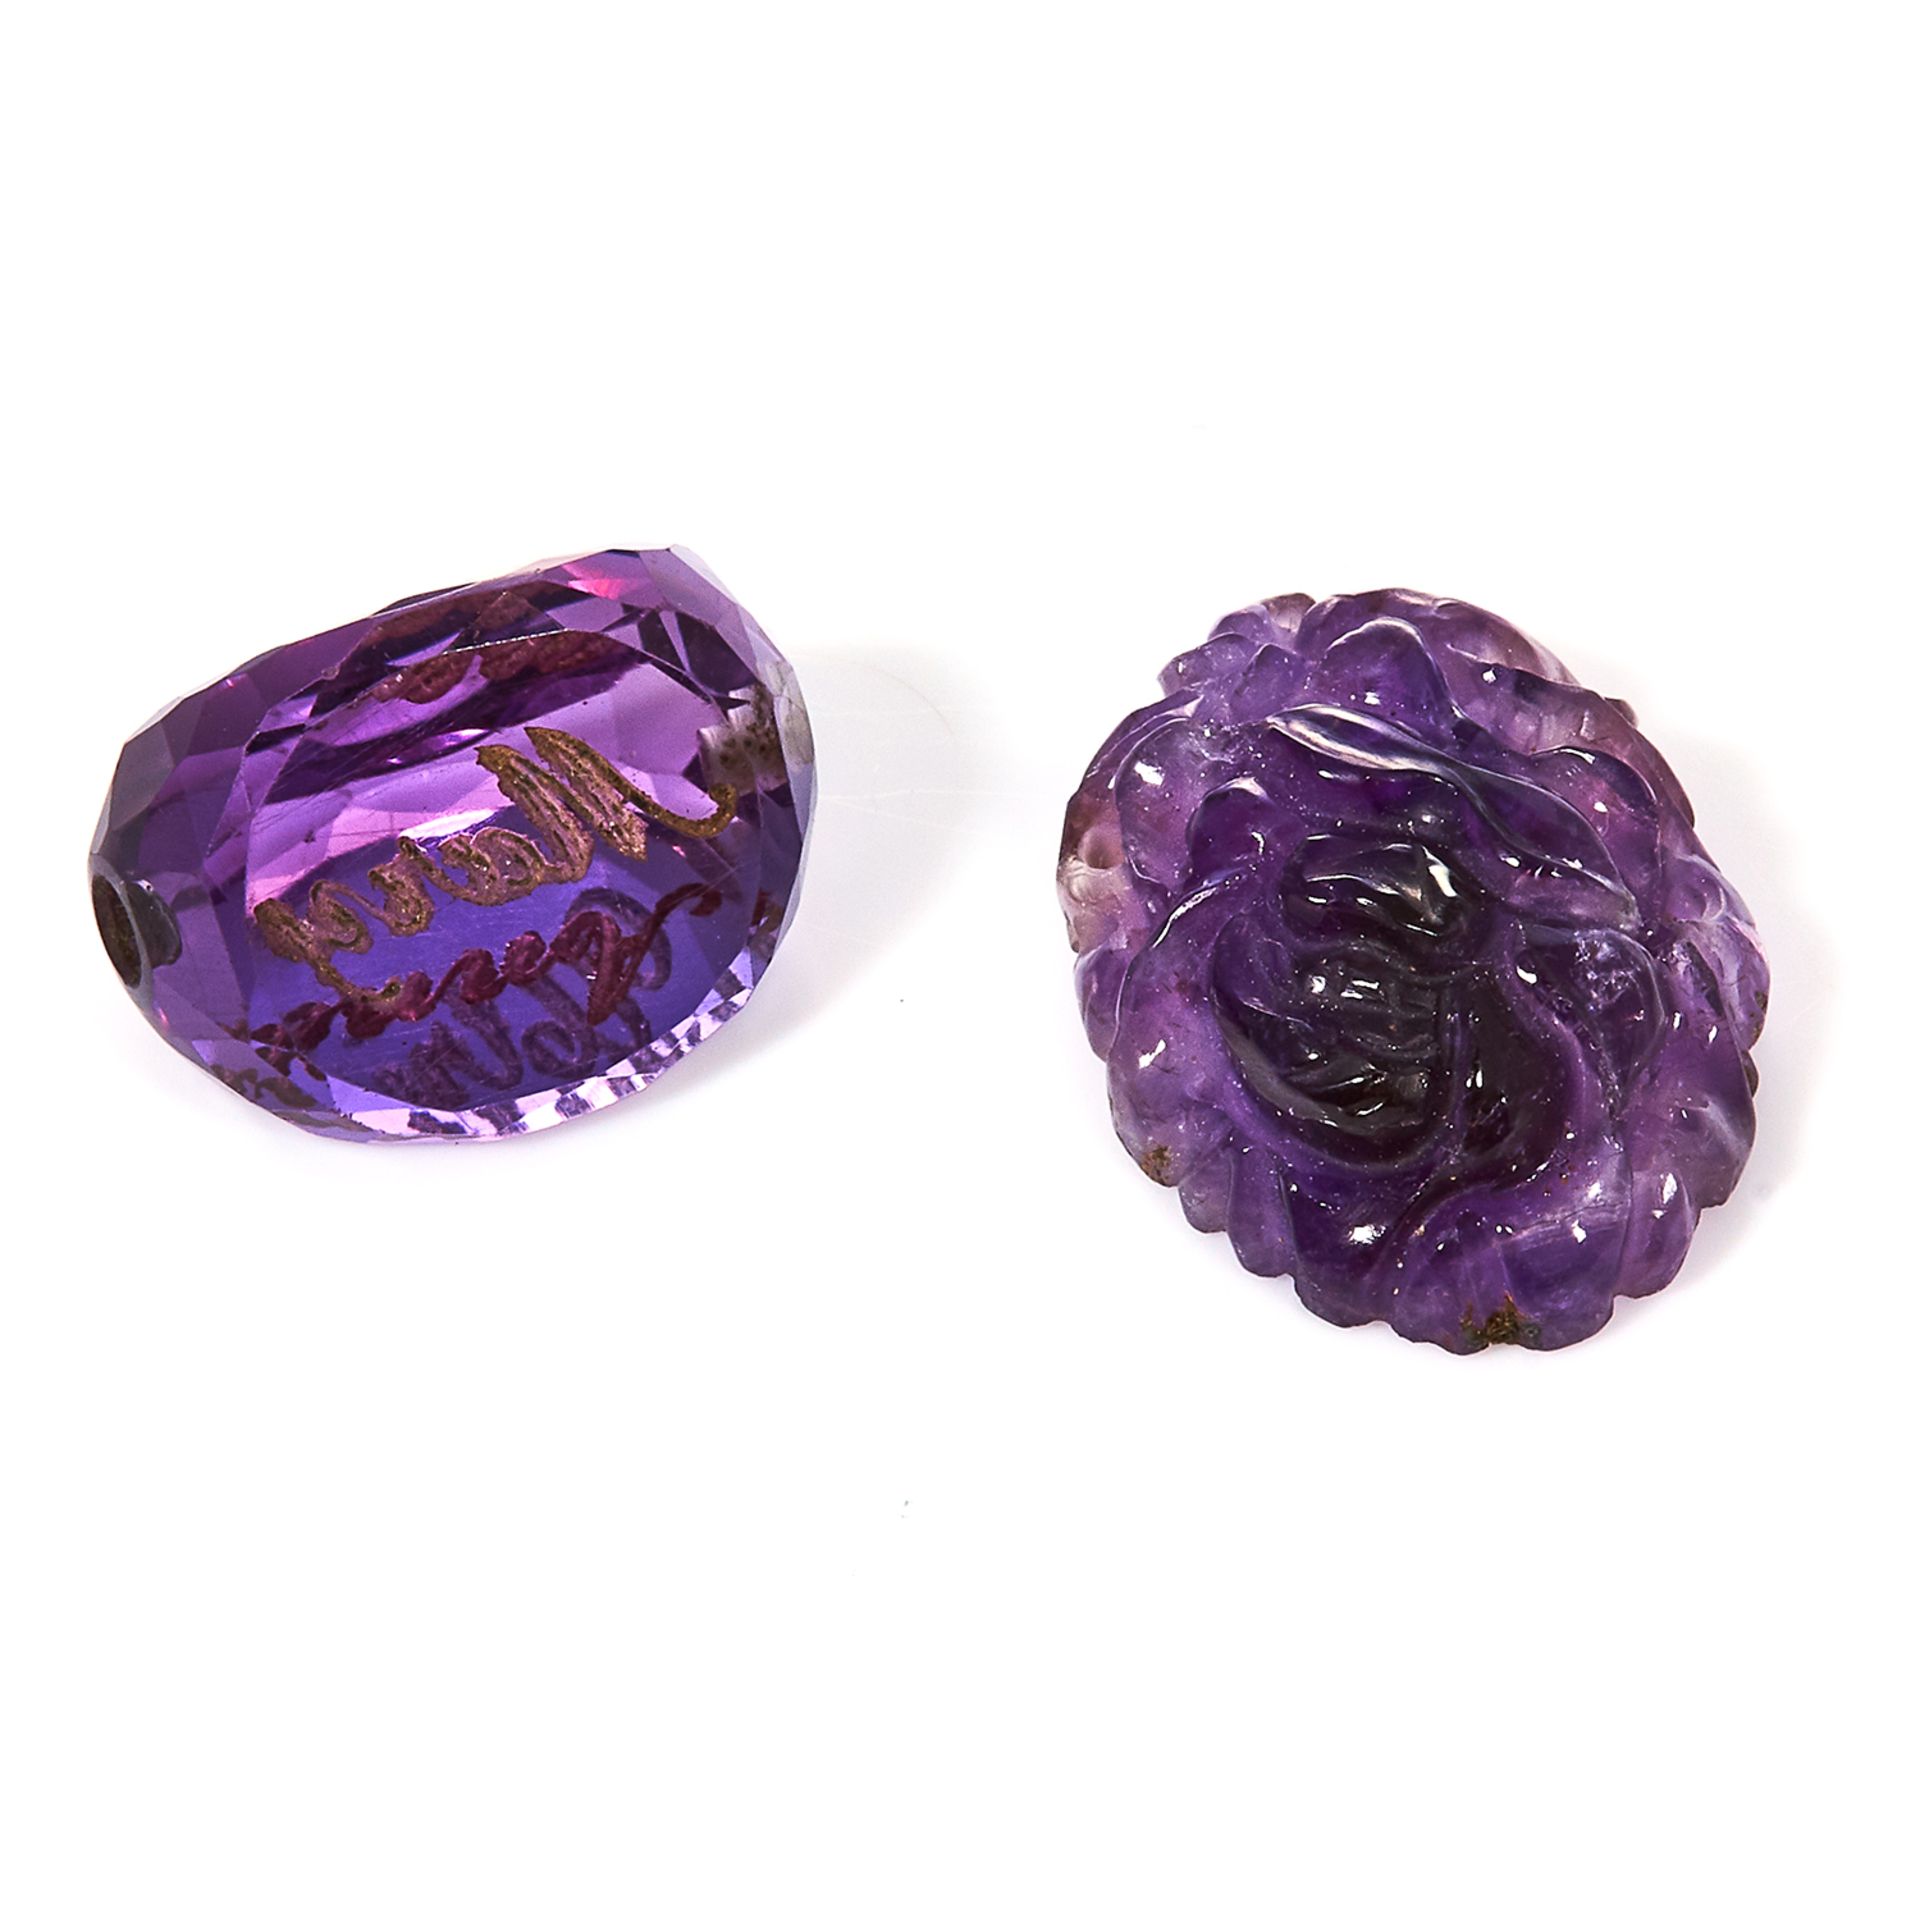 A 22.75 CARAT PARCEL OF AMETHYSTS carved and faceted.